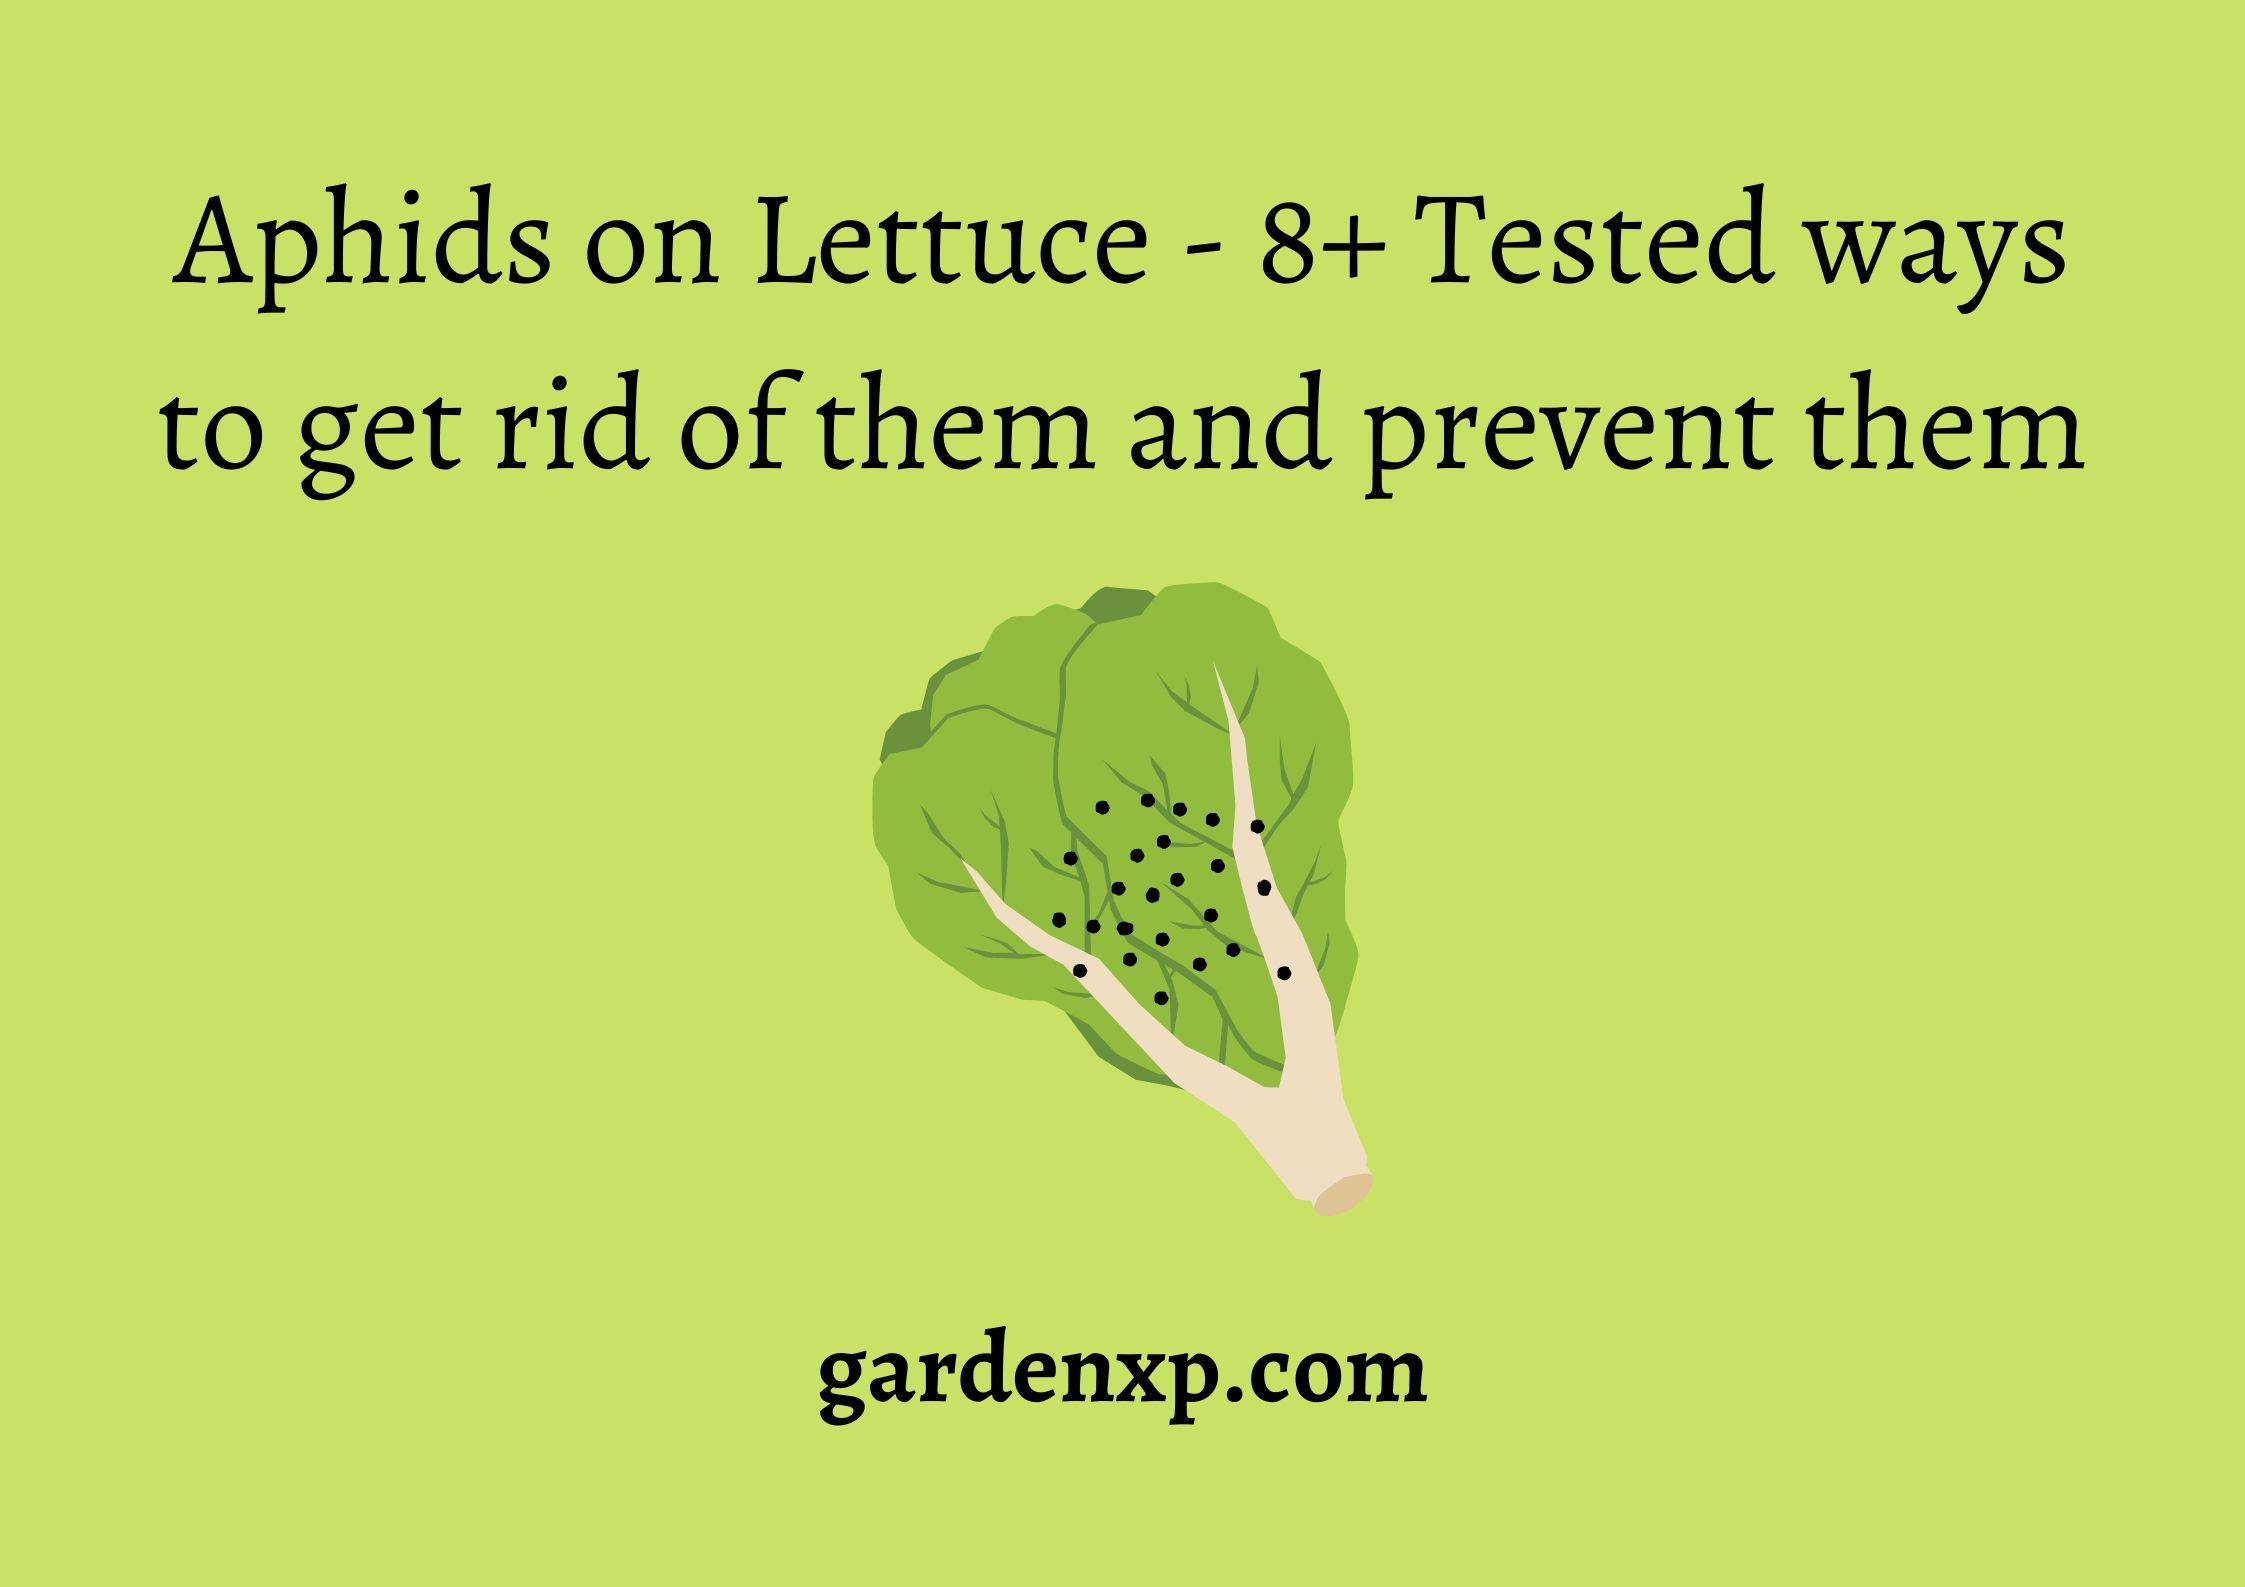 Aphids on Lettuce - 8+ Tested ways to get rid of them and prevent them